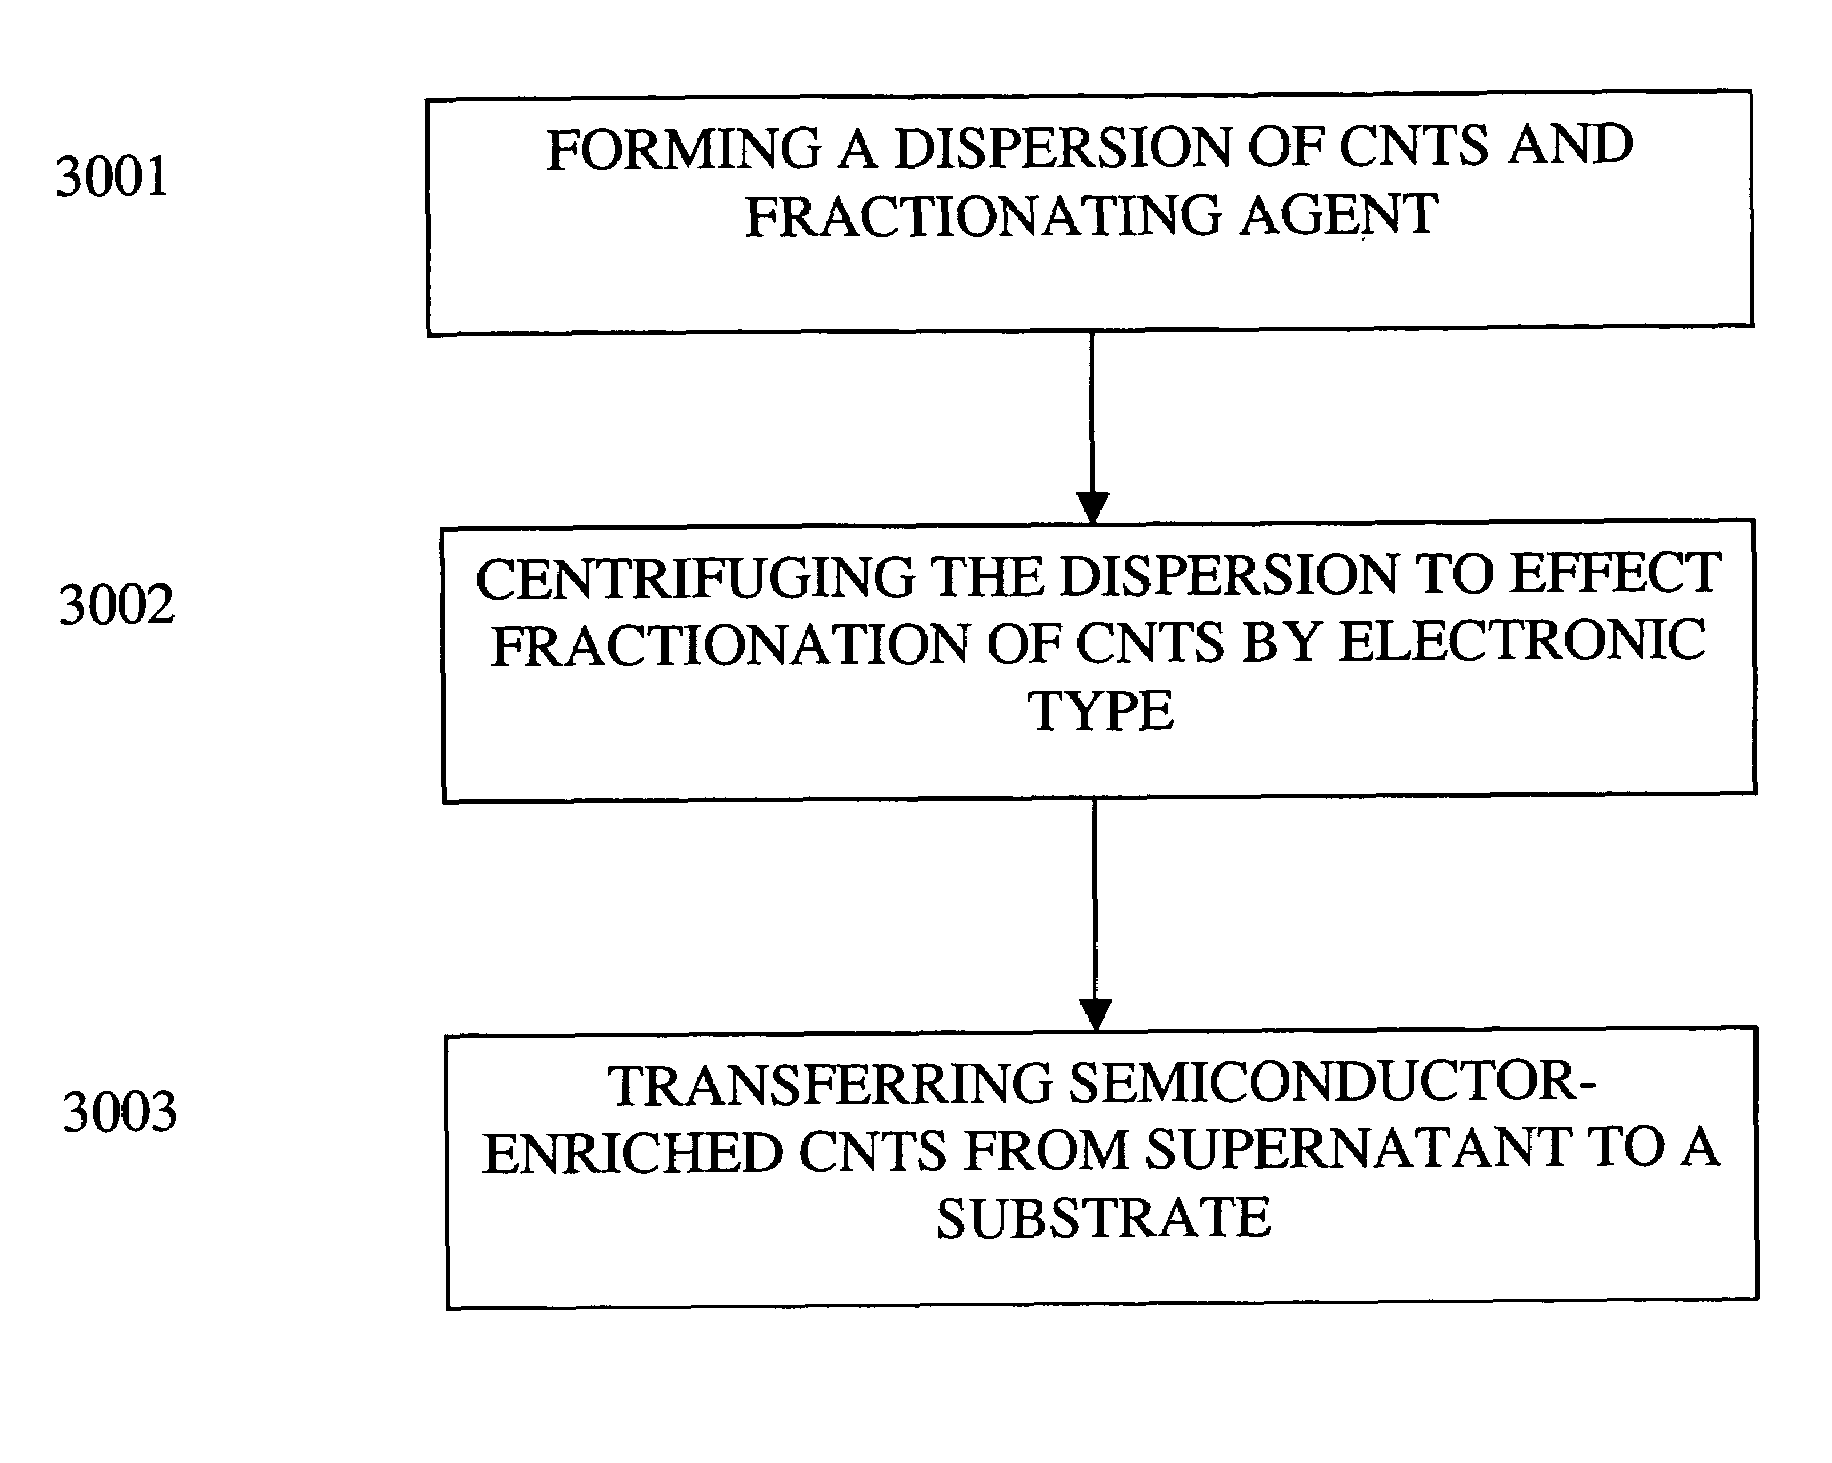 High performance field effect transistors comprising carbon nanotubes fabricated using solution based processing